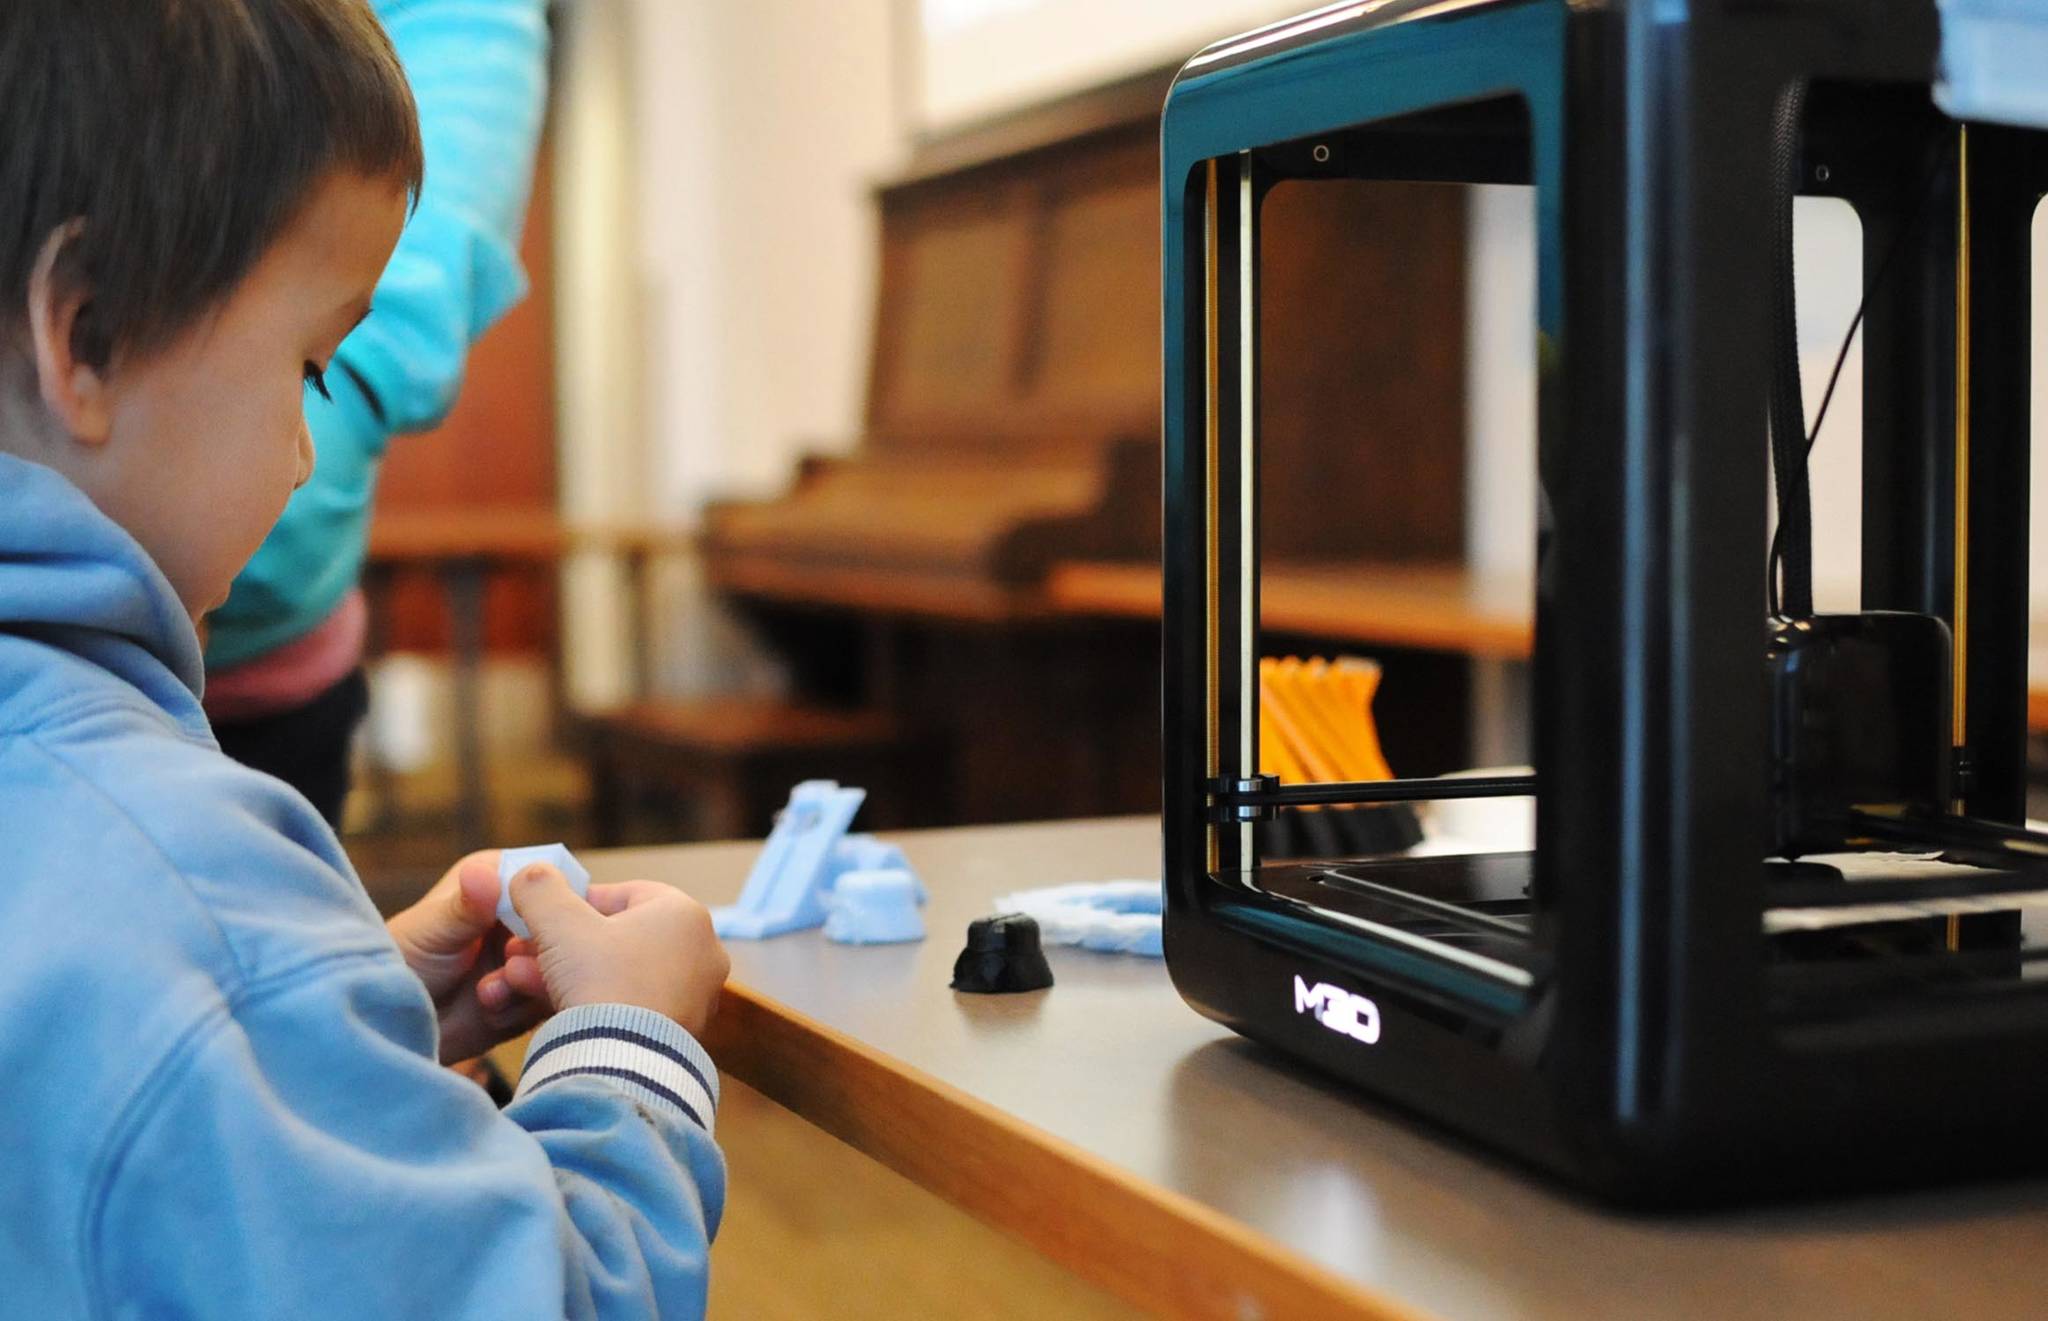 Isaac Perry, 5, checks out a cube produced by the Soldotna Public Library’s new 3D printer during a demonstration at the library Thursday, Oct. 19, 2017 in Soldotna, Alaska. The library acquired the machine, which can print three-dimensional objects out of plastic based on a submitted pattern, in July and is now making it available for public use. It’s currently free, supported by funds from the Soldotna Library Friends, with a suggested donation of $3 per print. Eventually, if demand outpaces supply, the library expects to have to establish a fee, according to the 3D printer policy. (Photo by Elizabeth Earl/Peninsula Clarion)